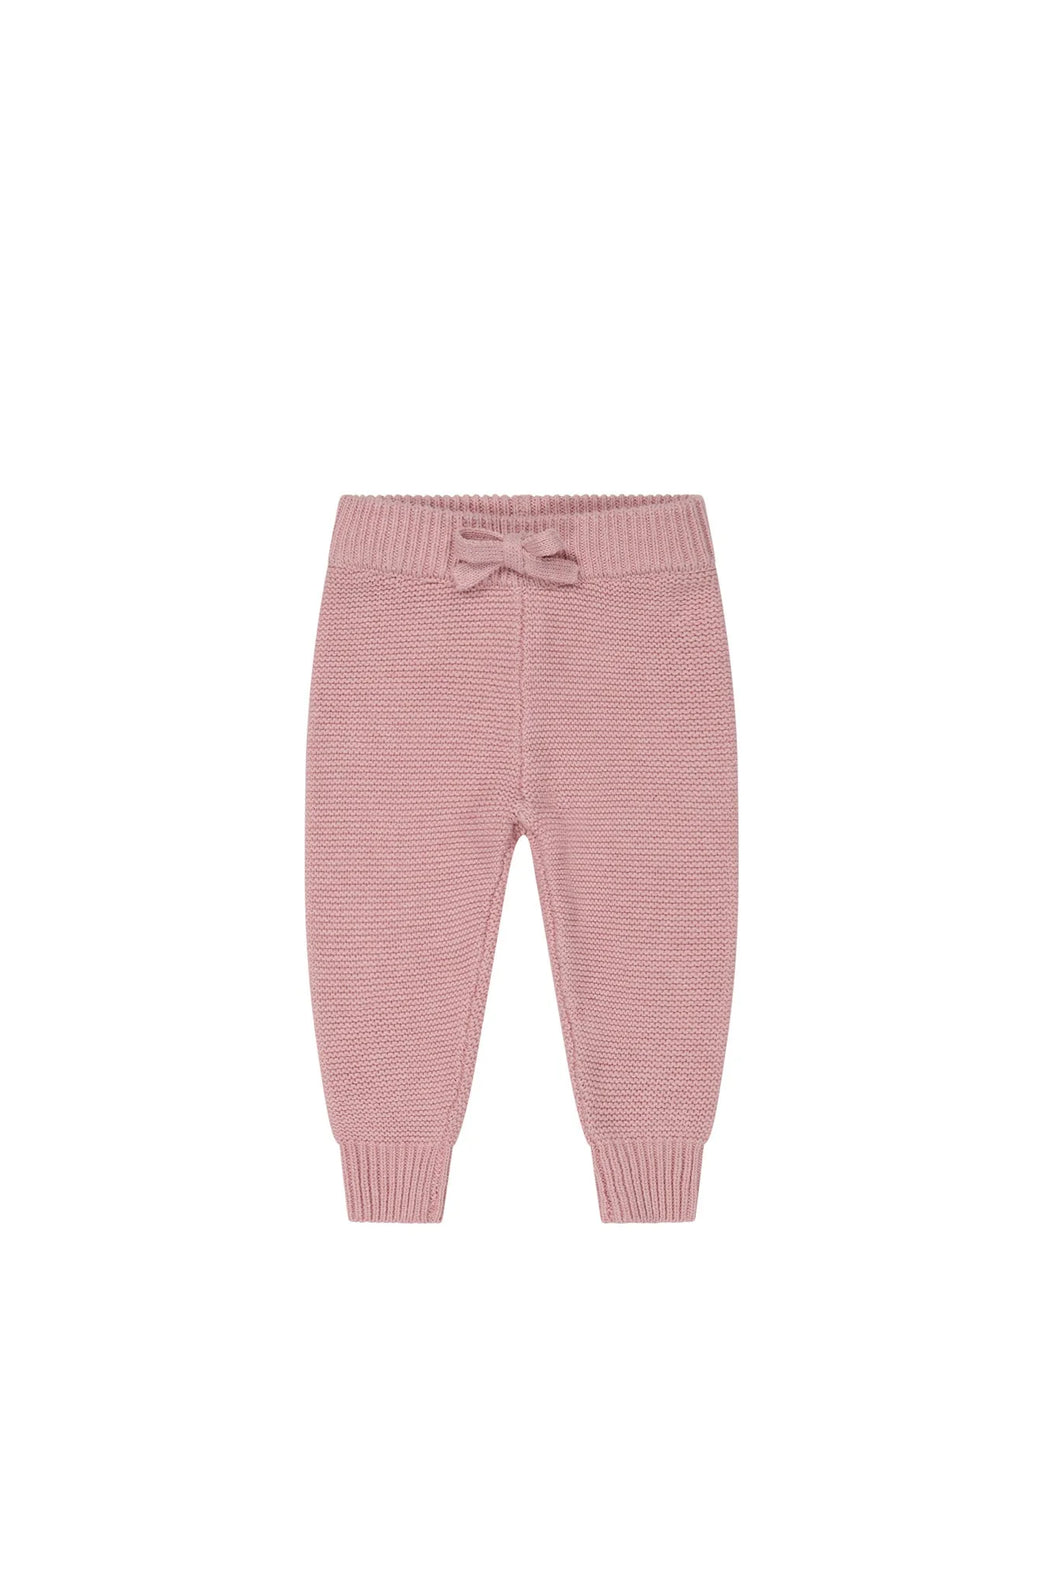 Mable Pant - Ballet Slipper Marle